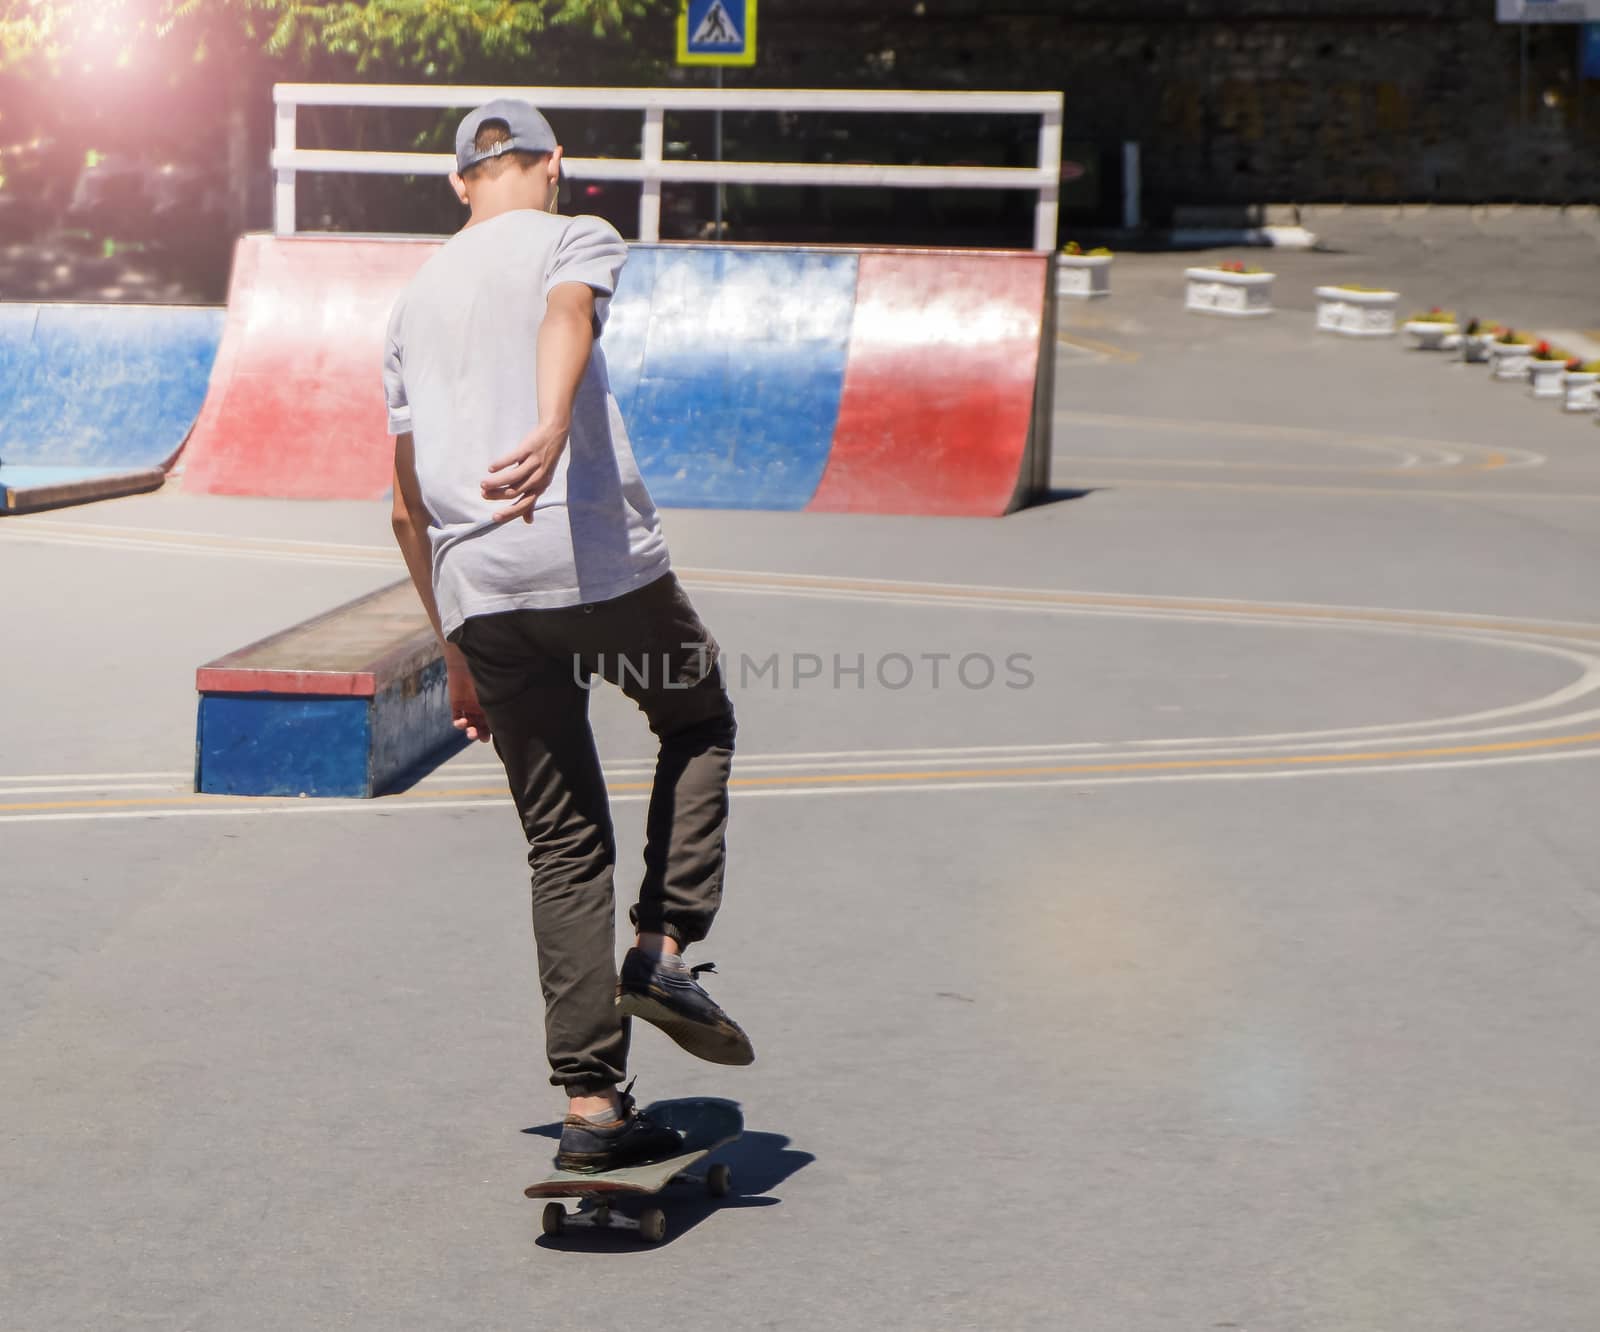 A teenage boy trains to ride a skateboard in a skate Park, a view from the back.